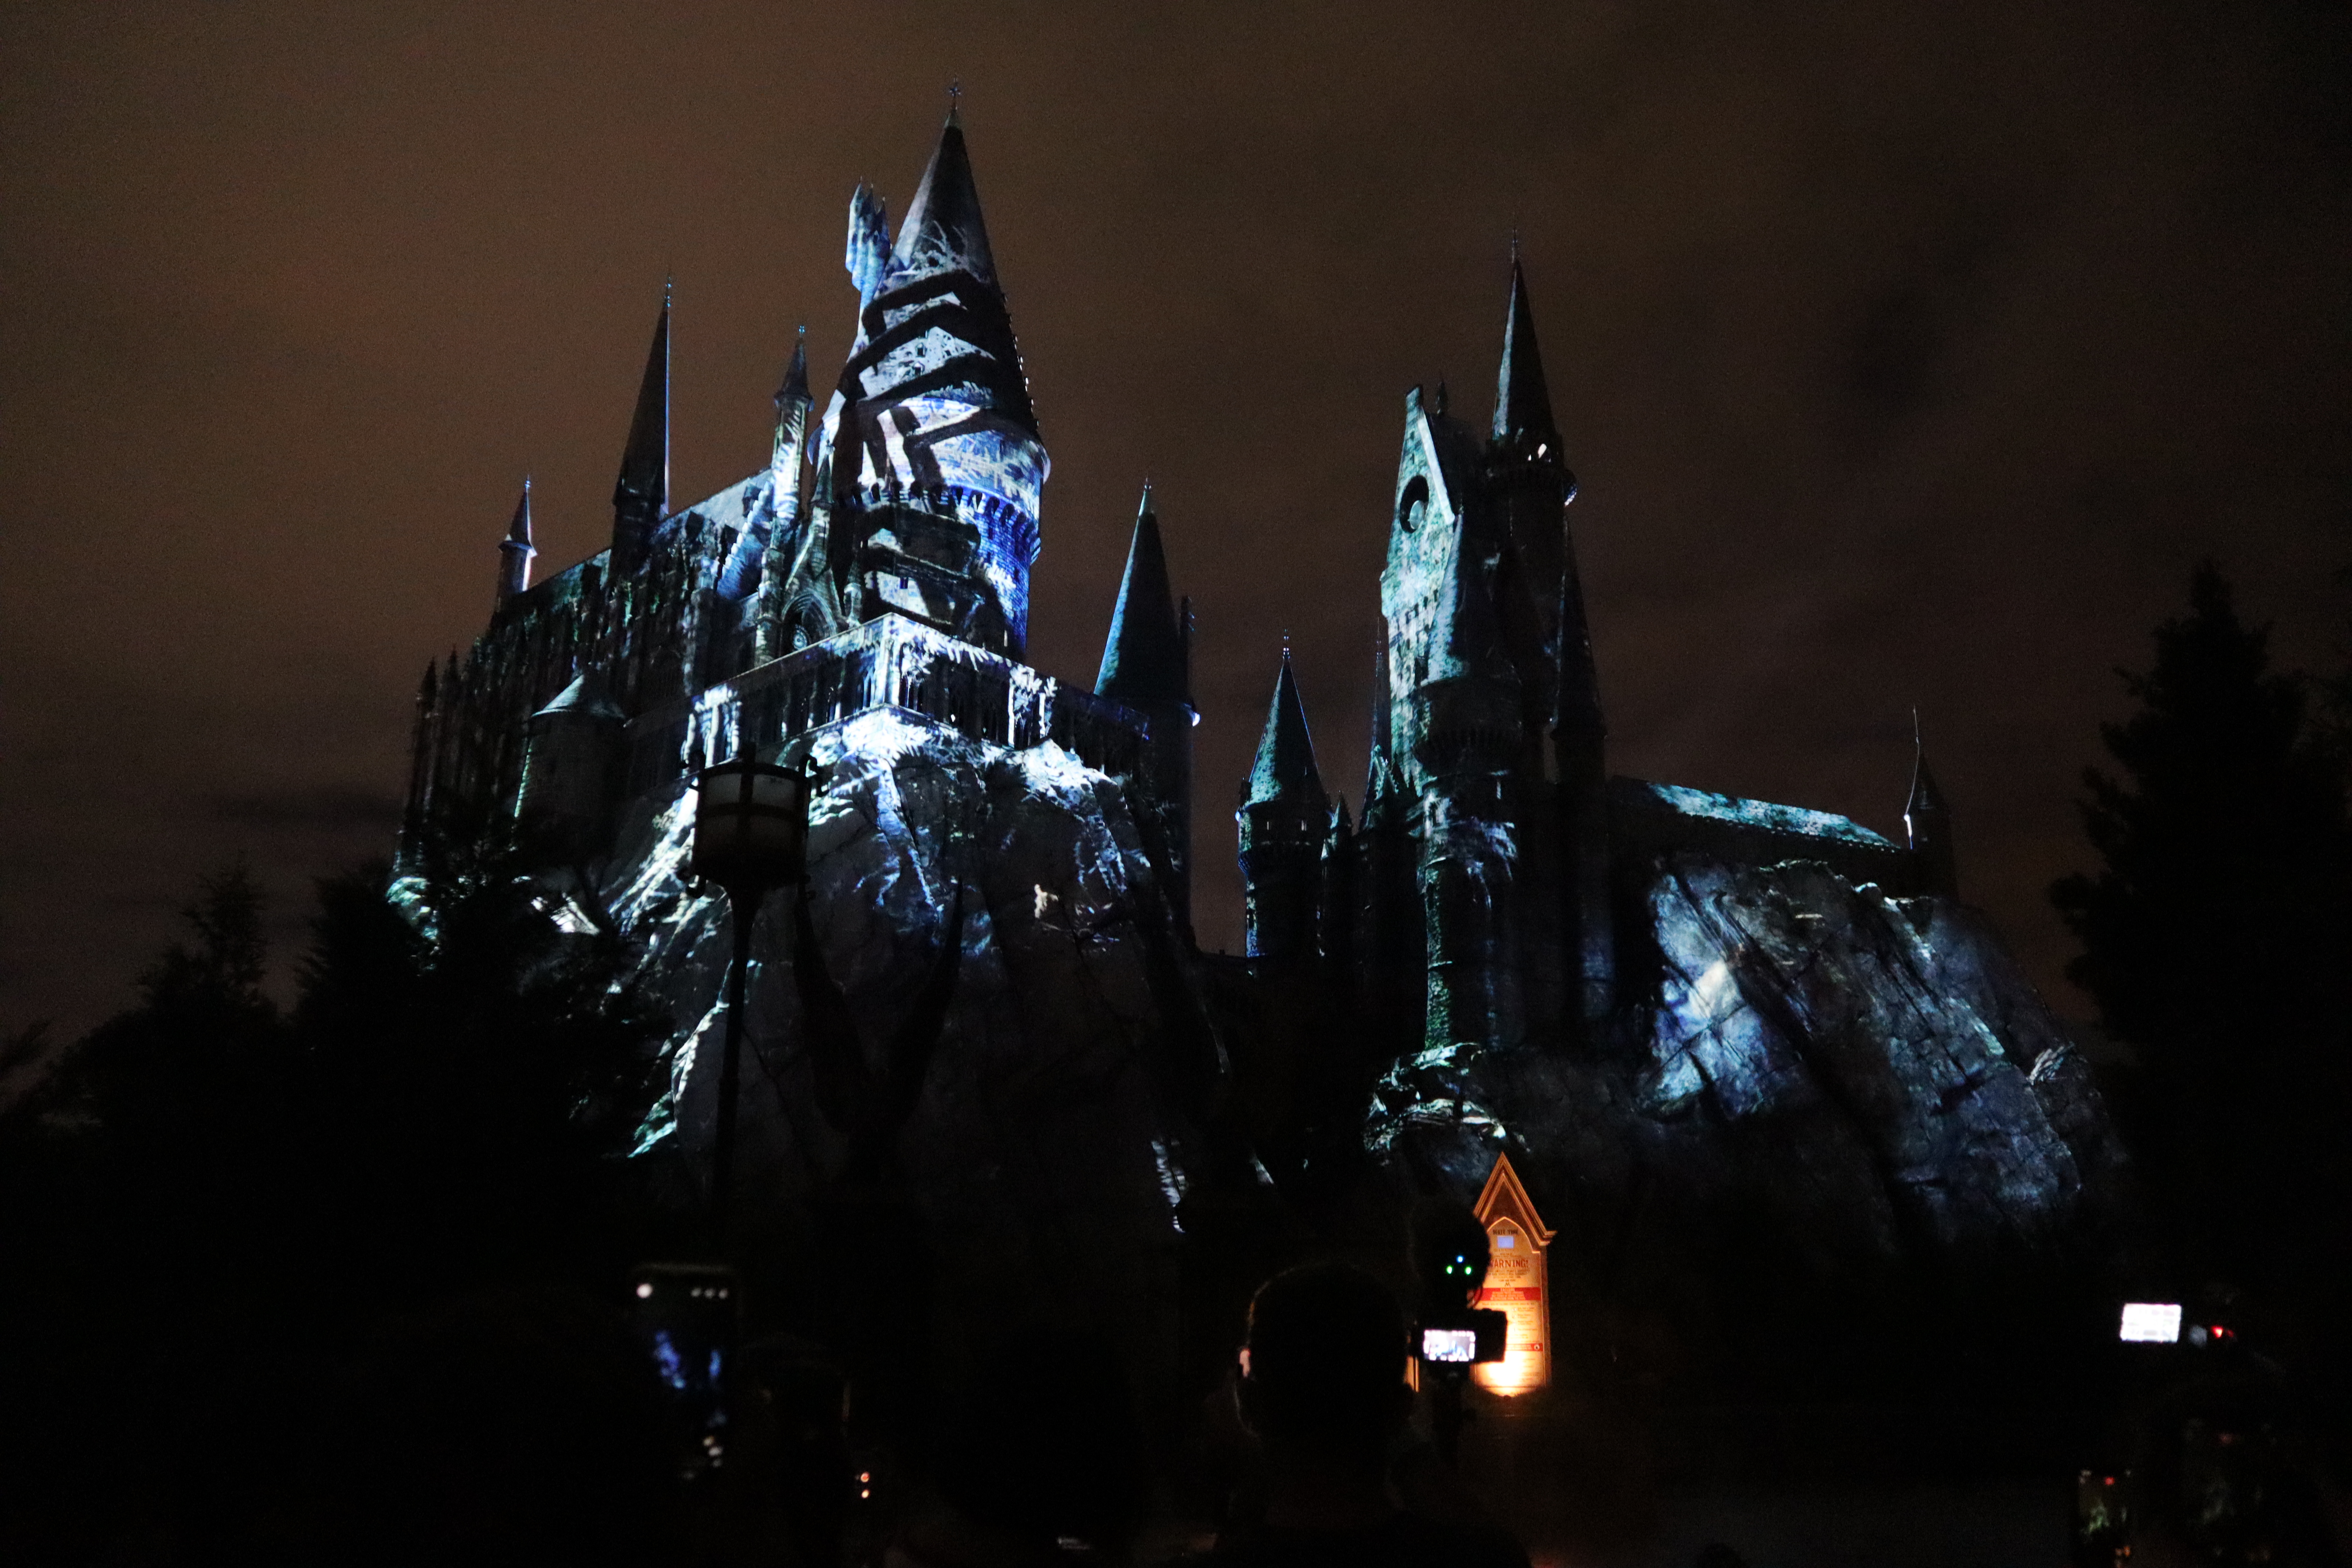 Dementors’ icy fingers grip the tower in the “Dark Arts at Hogwarts Castle” light show.